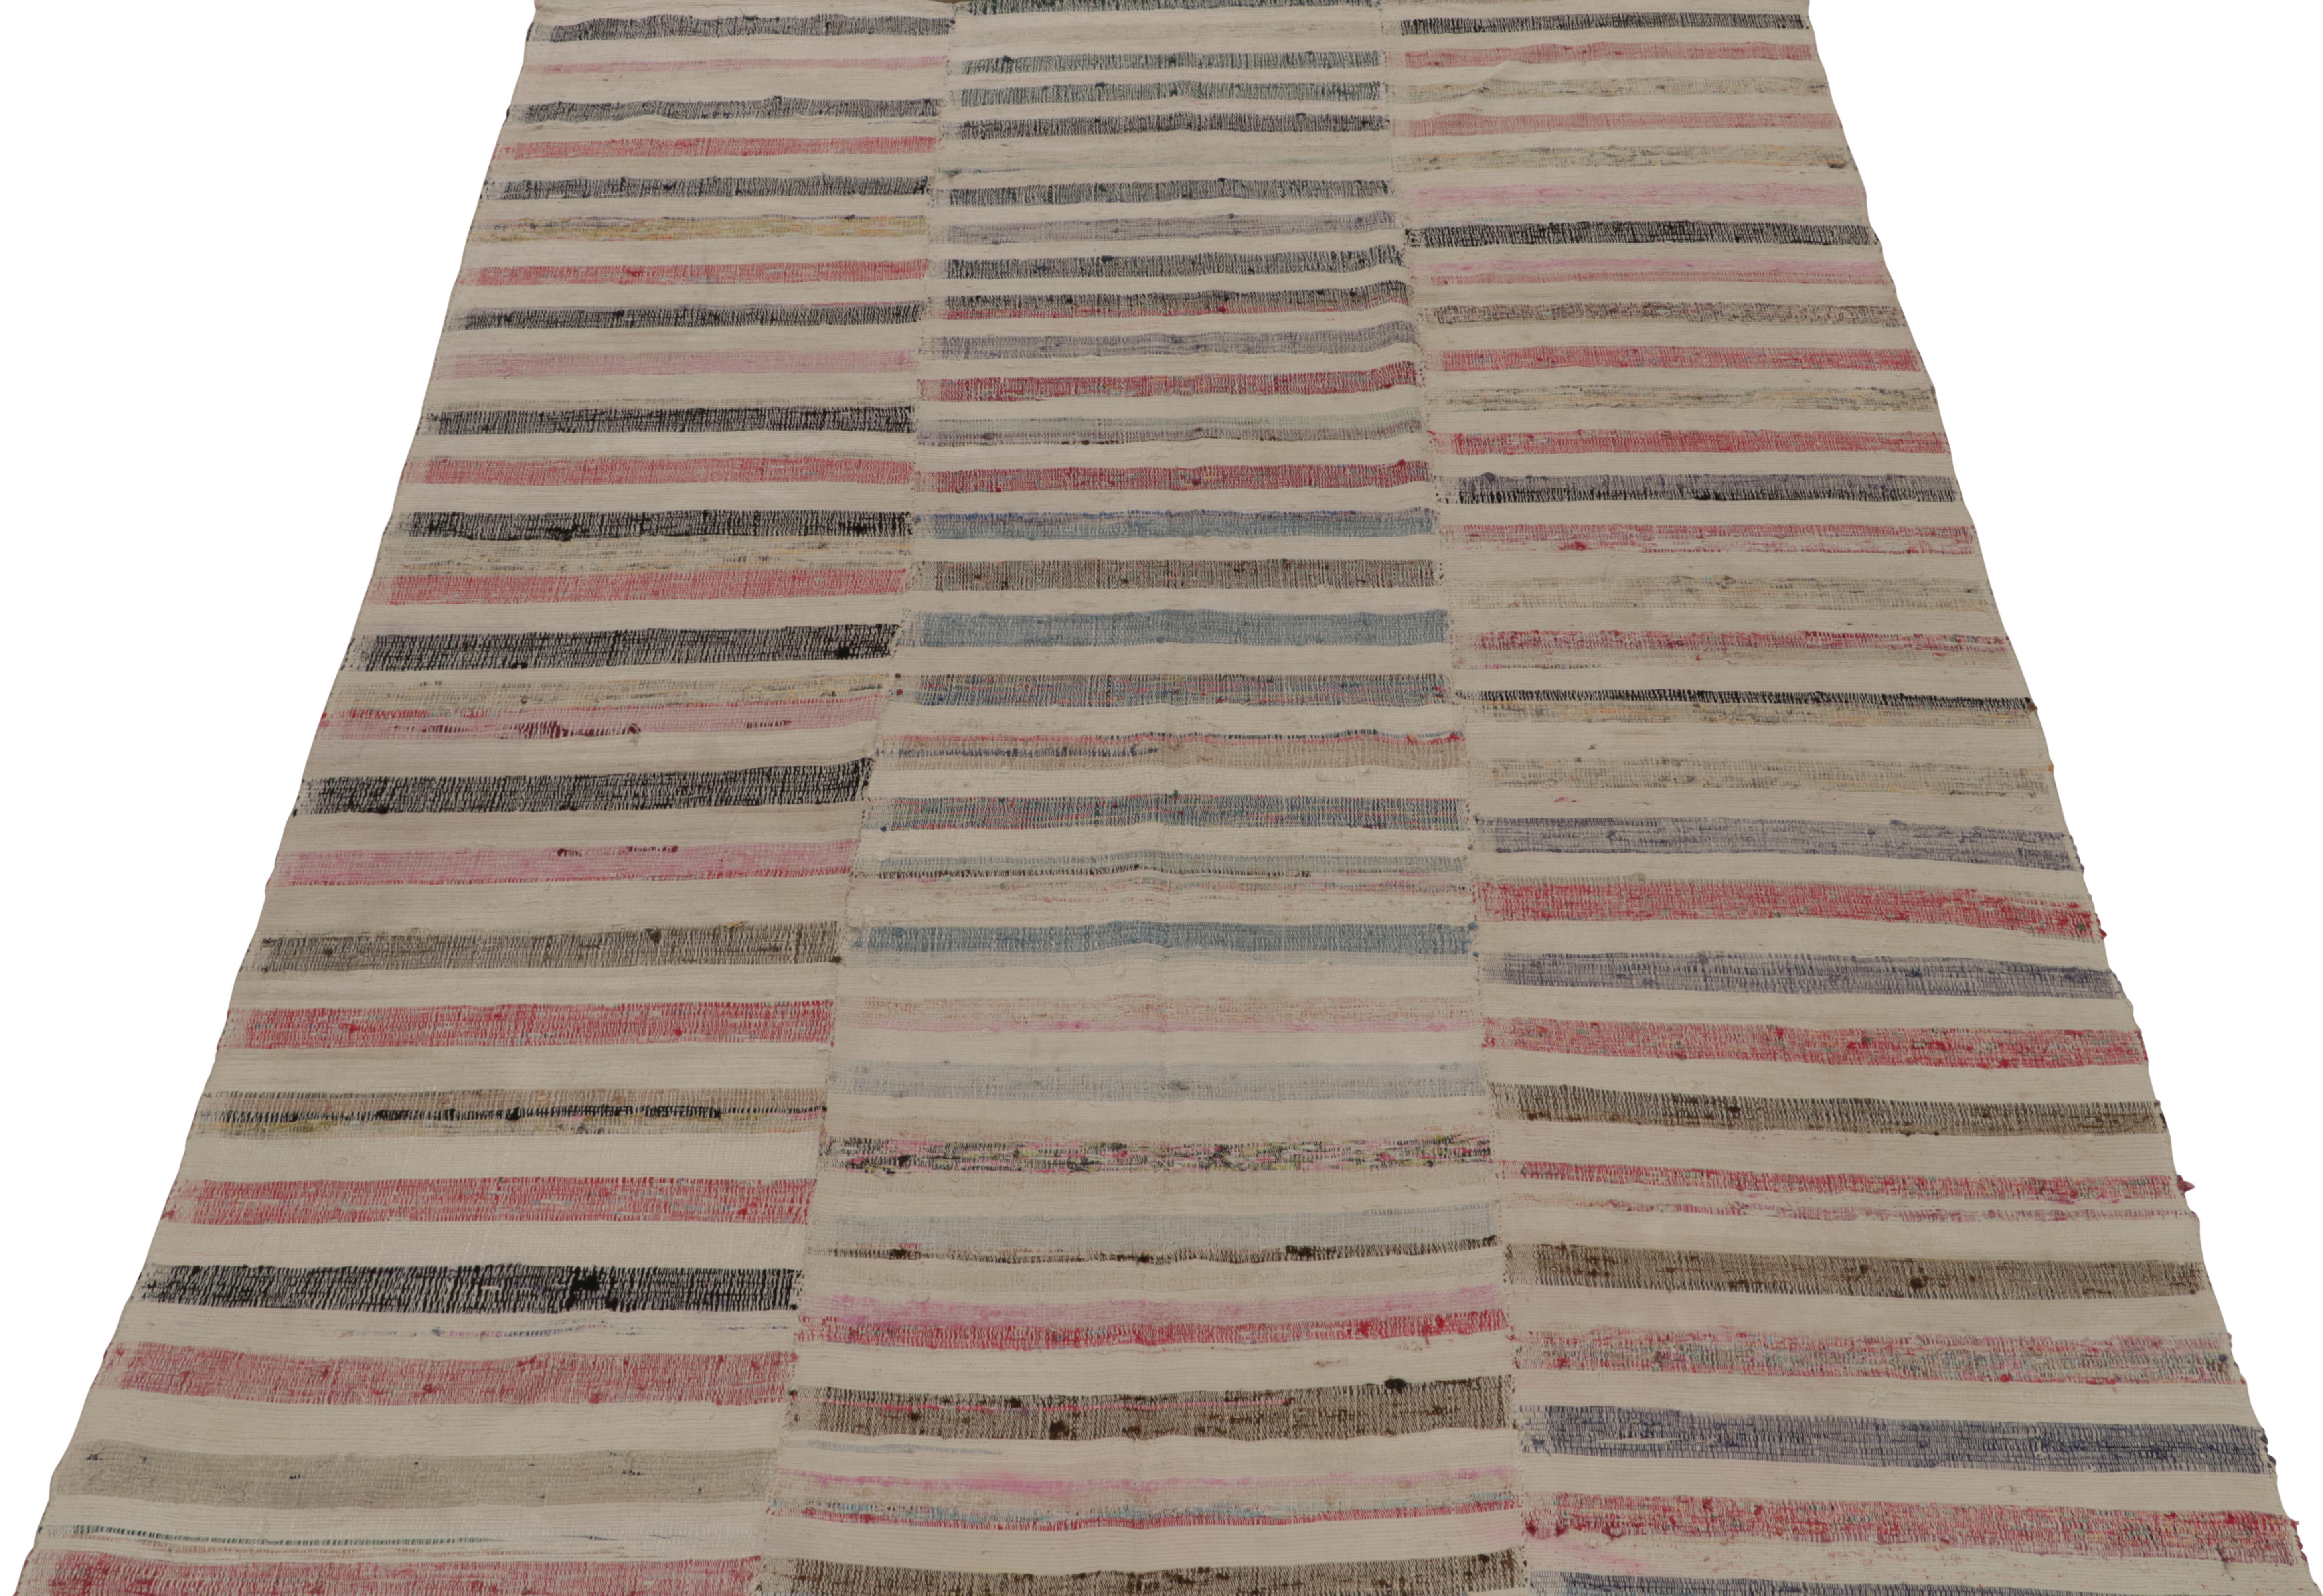 Handwoven in wool, Rug & Kilim presents a 7x10 contemporary rug from their innovative new patchwork kilim collection. 

On the Design: 

This flat weave technique repurposes vintage yarns in polychromatic stripes and striae, achieving a playful look